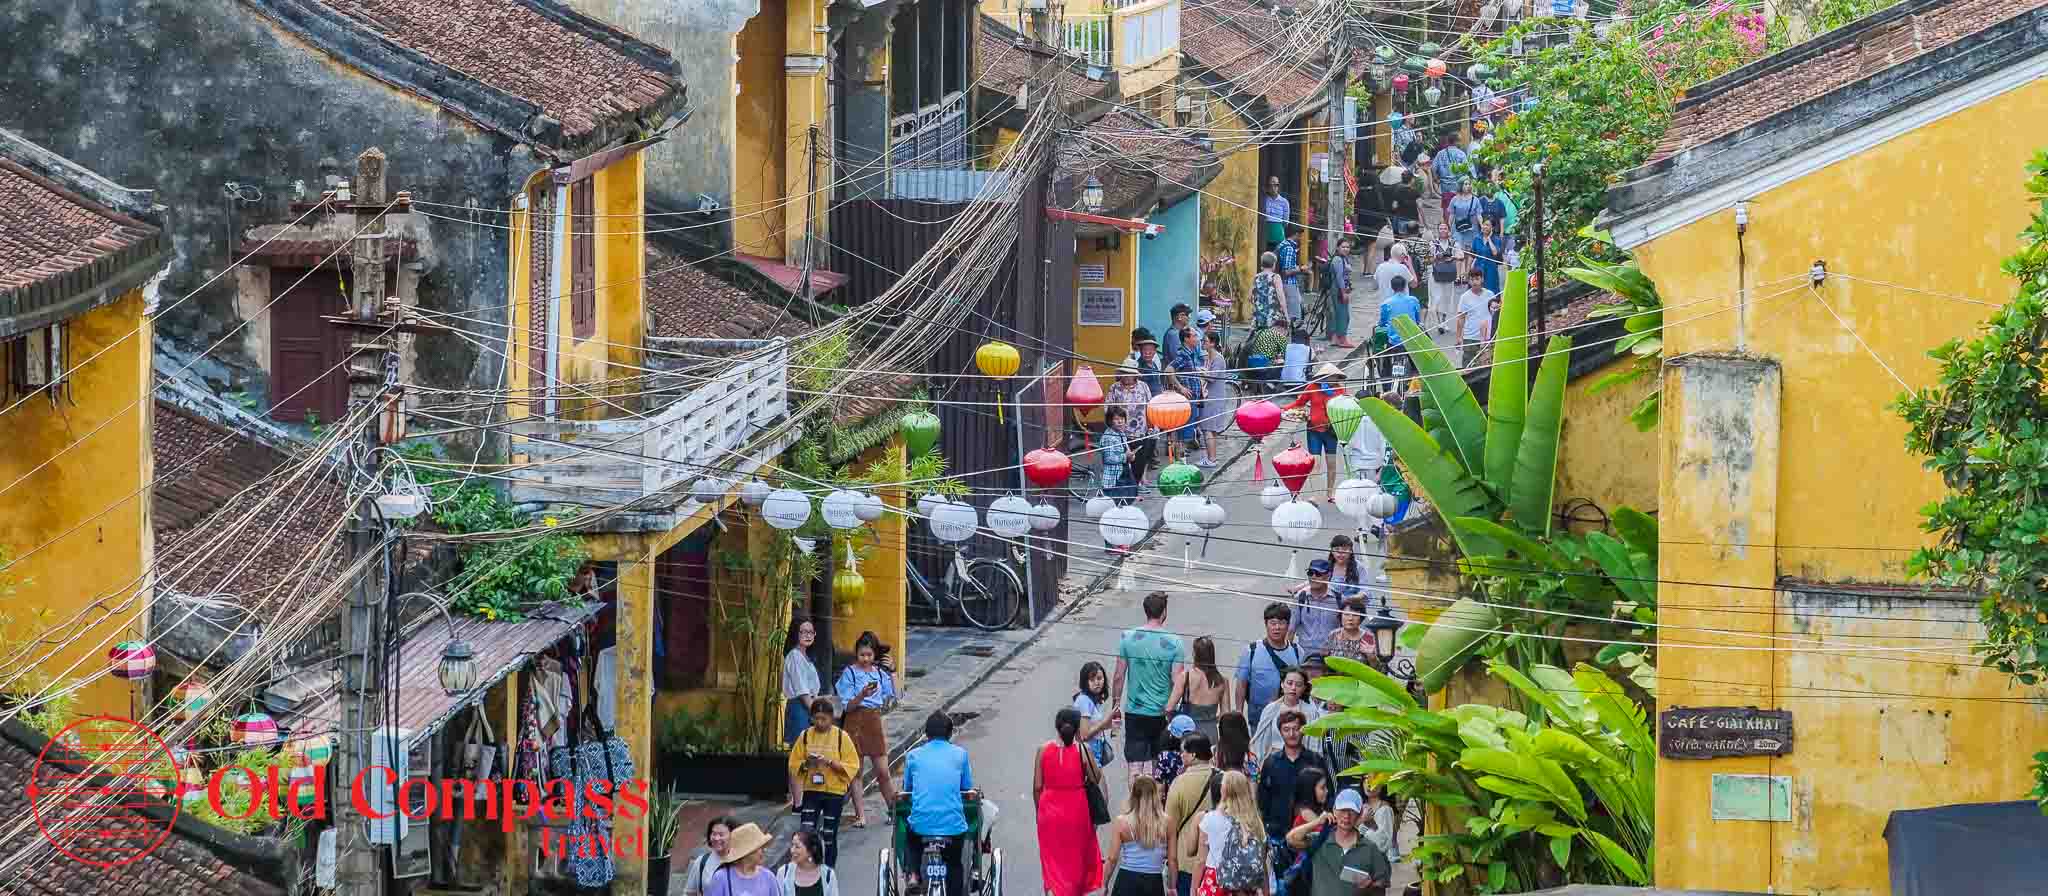 Hoi An's World Heritage listed streets